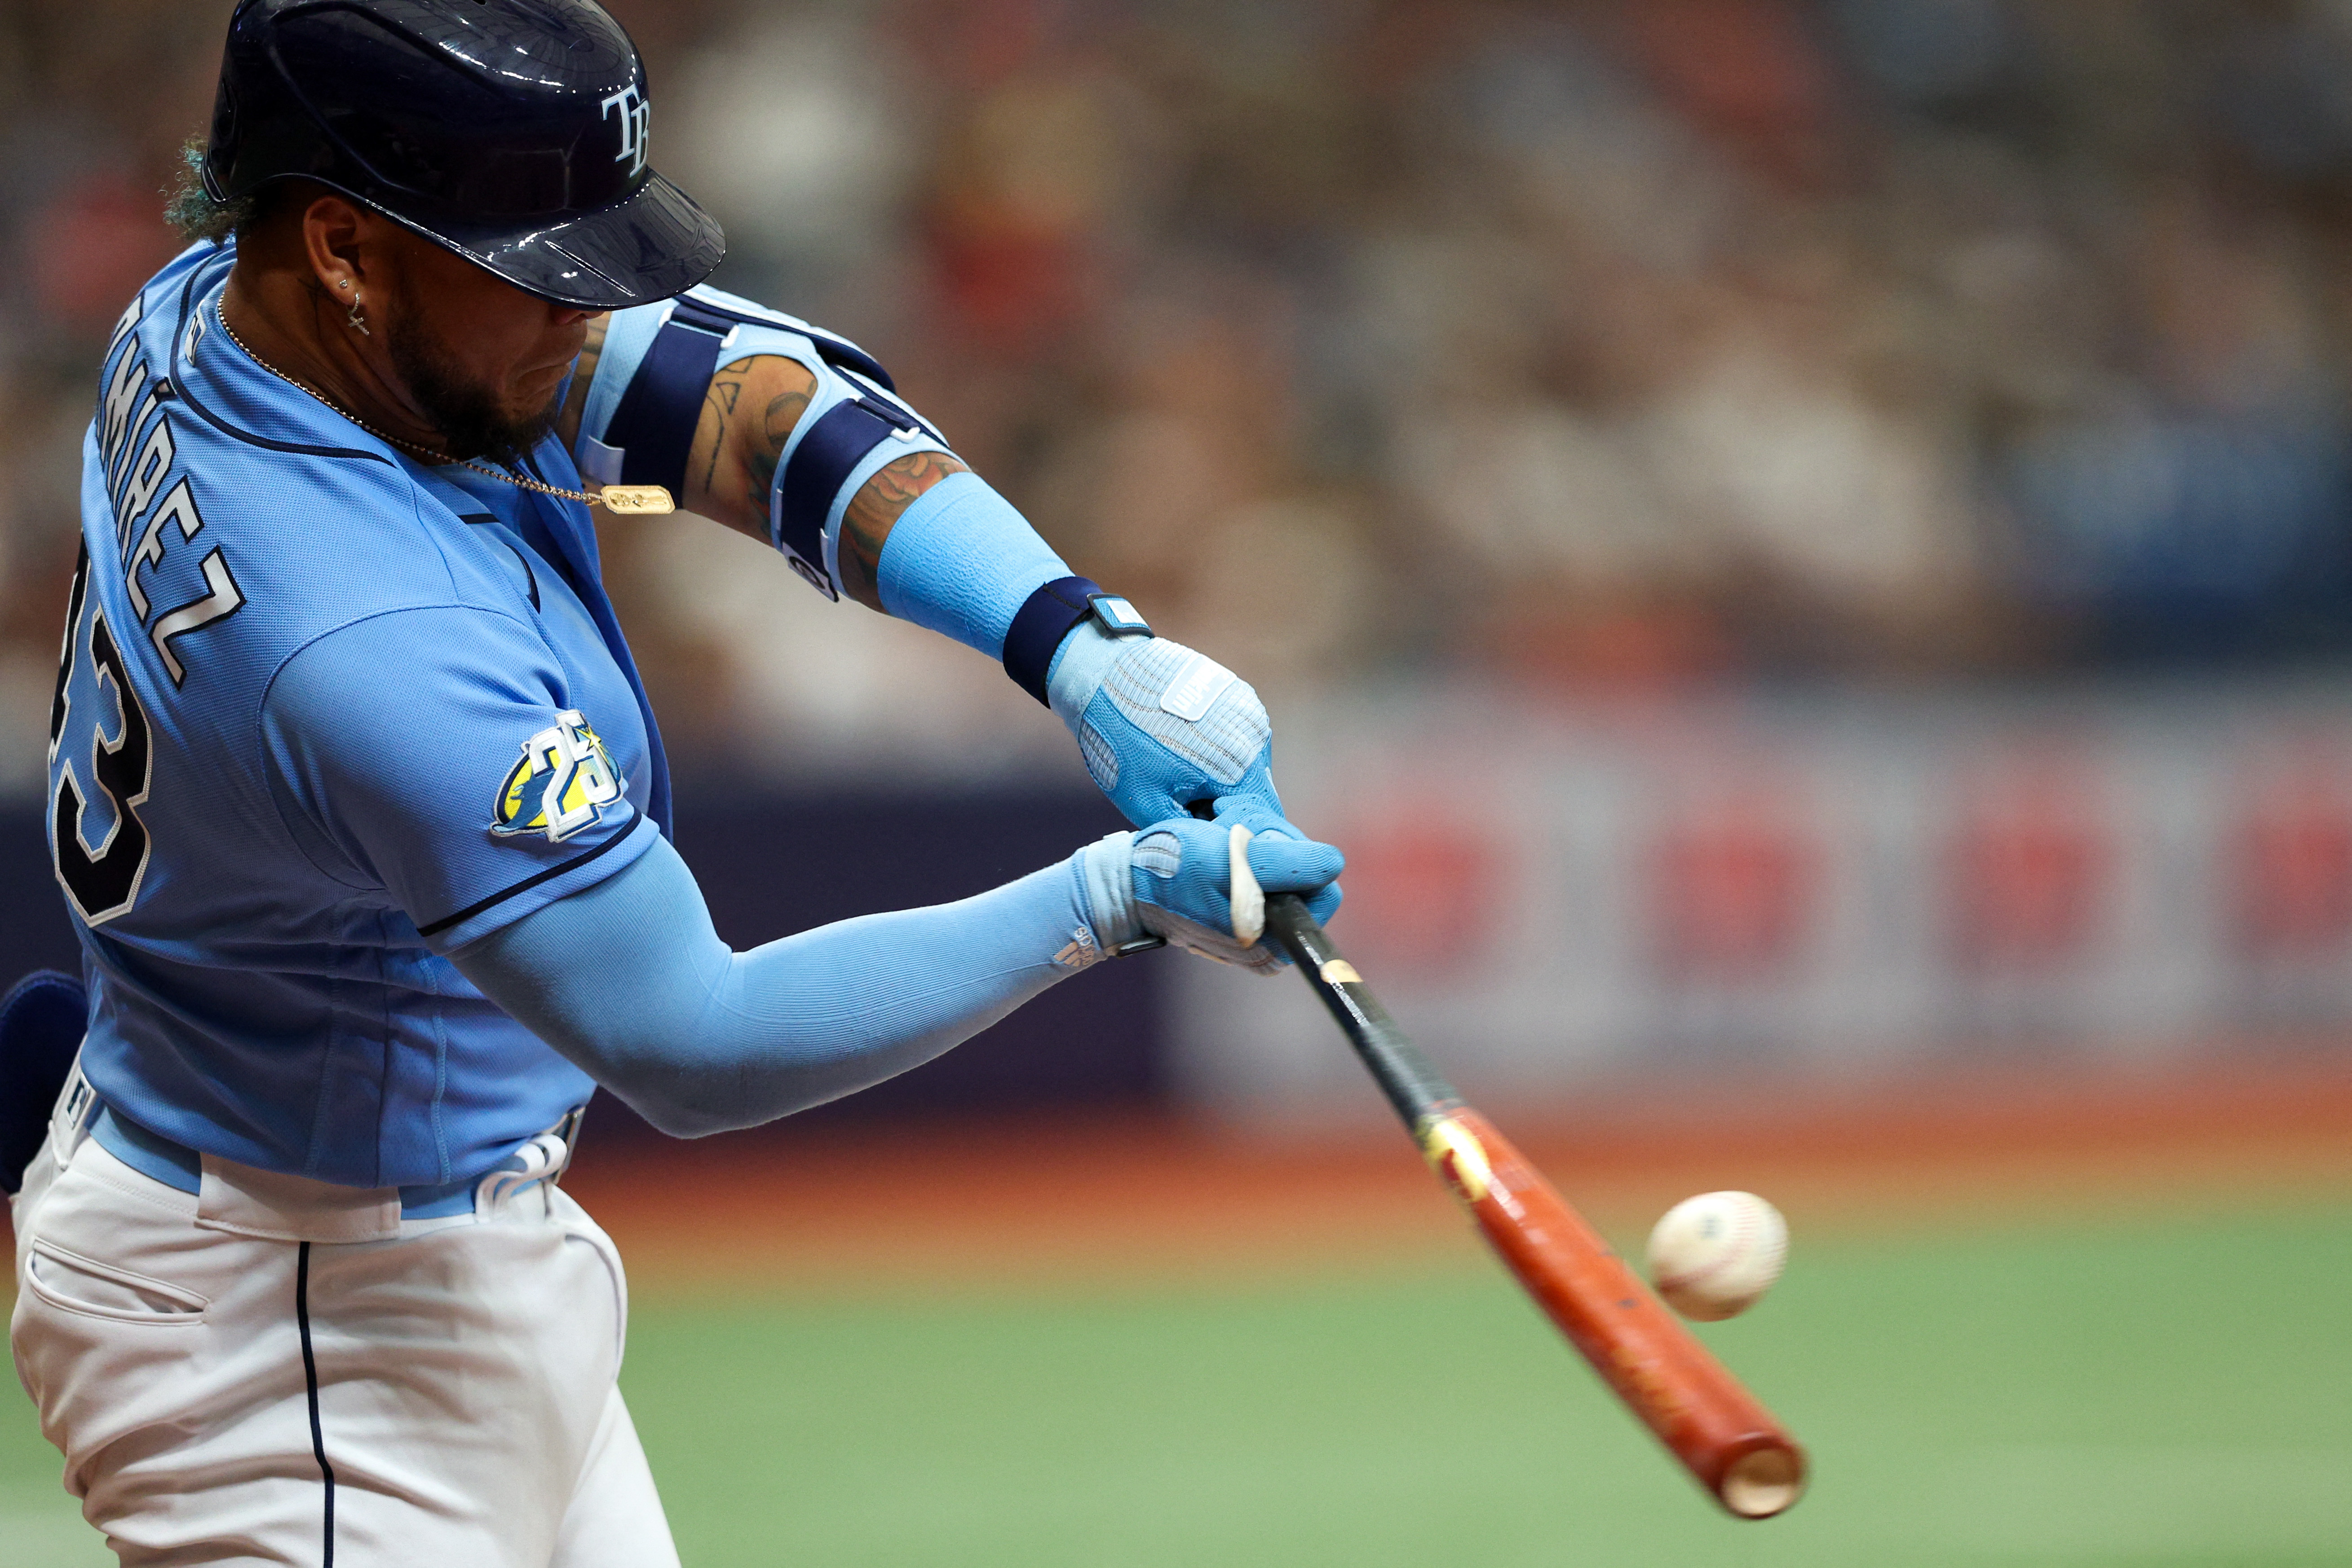 MLB notes: Padres get OF Myers from Rays